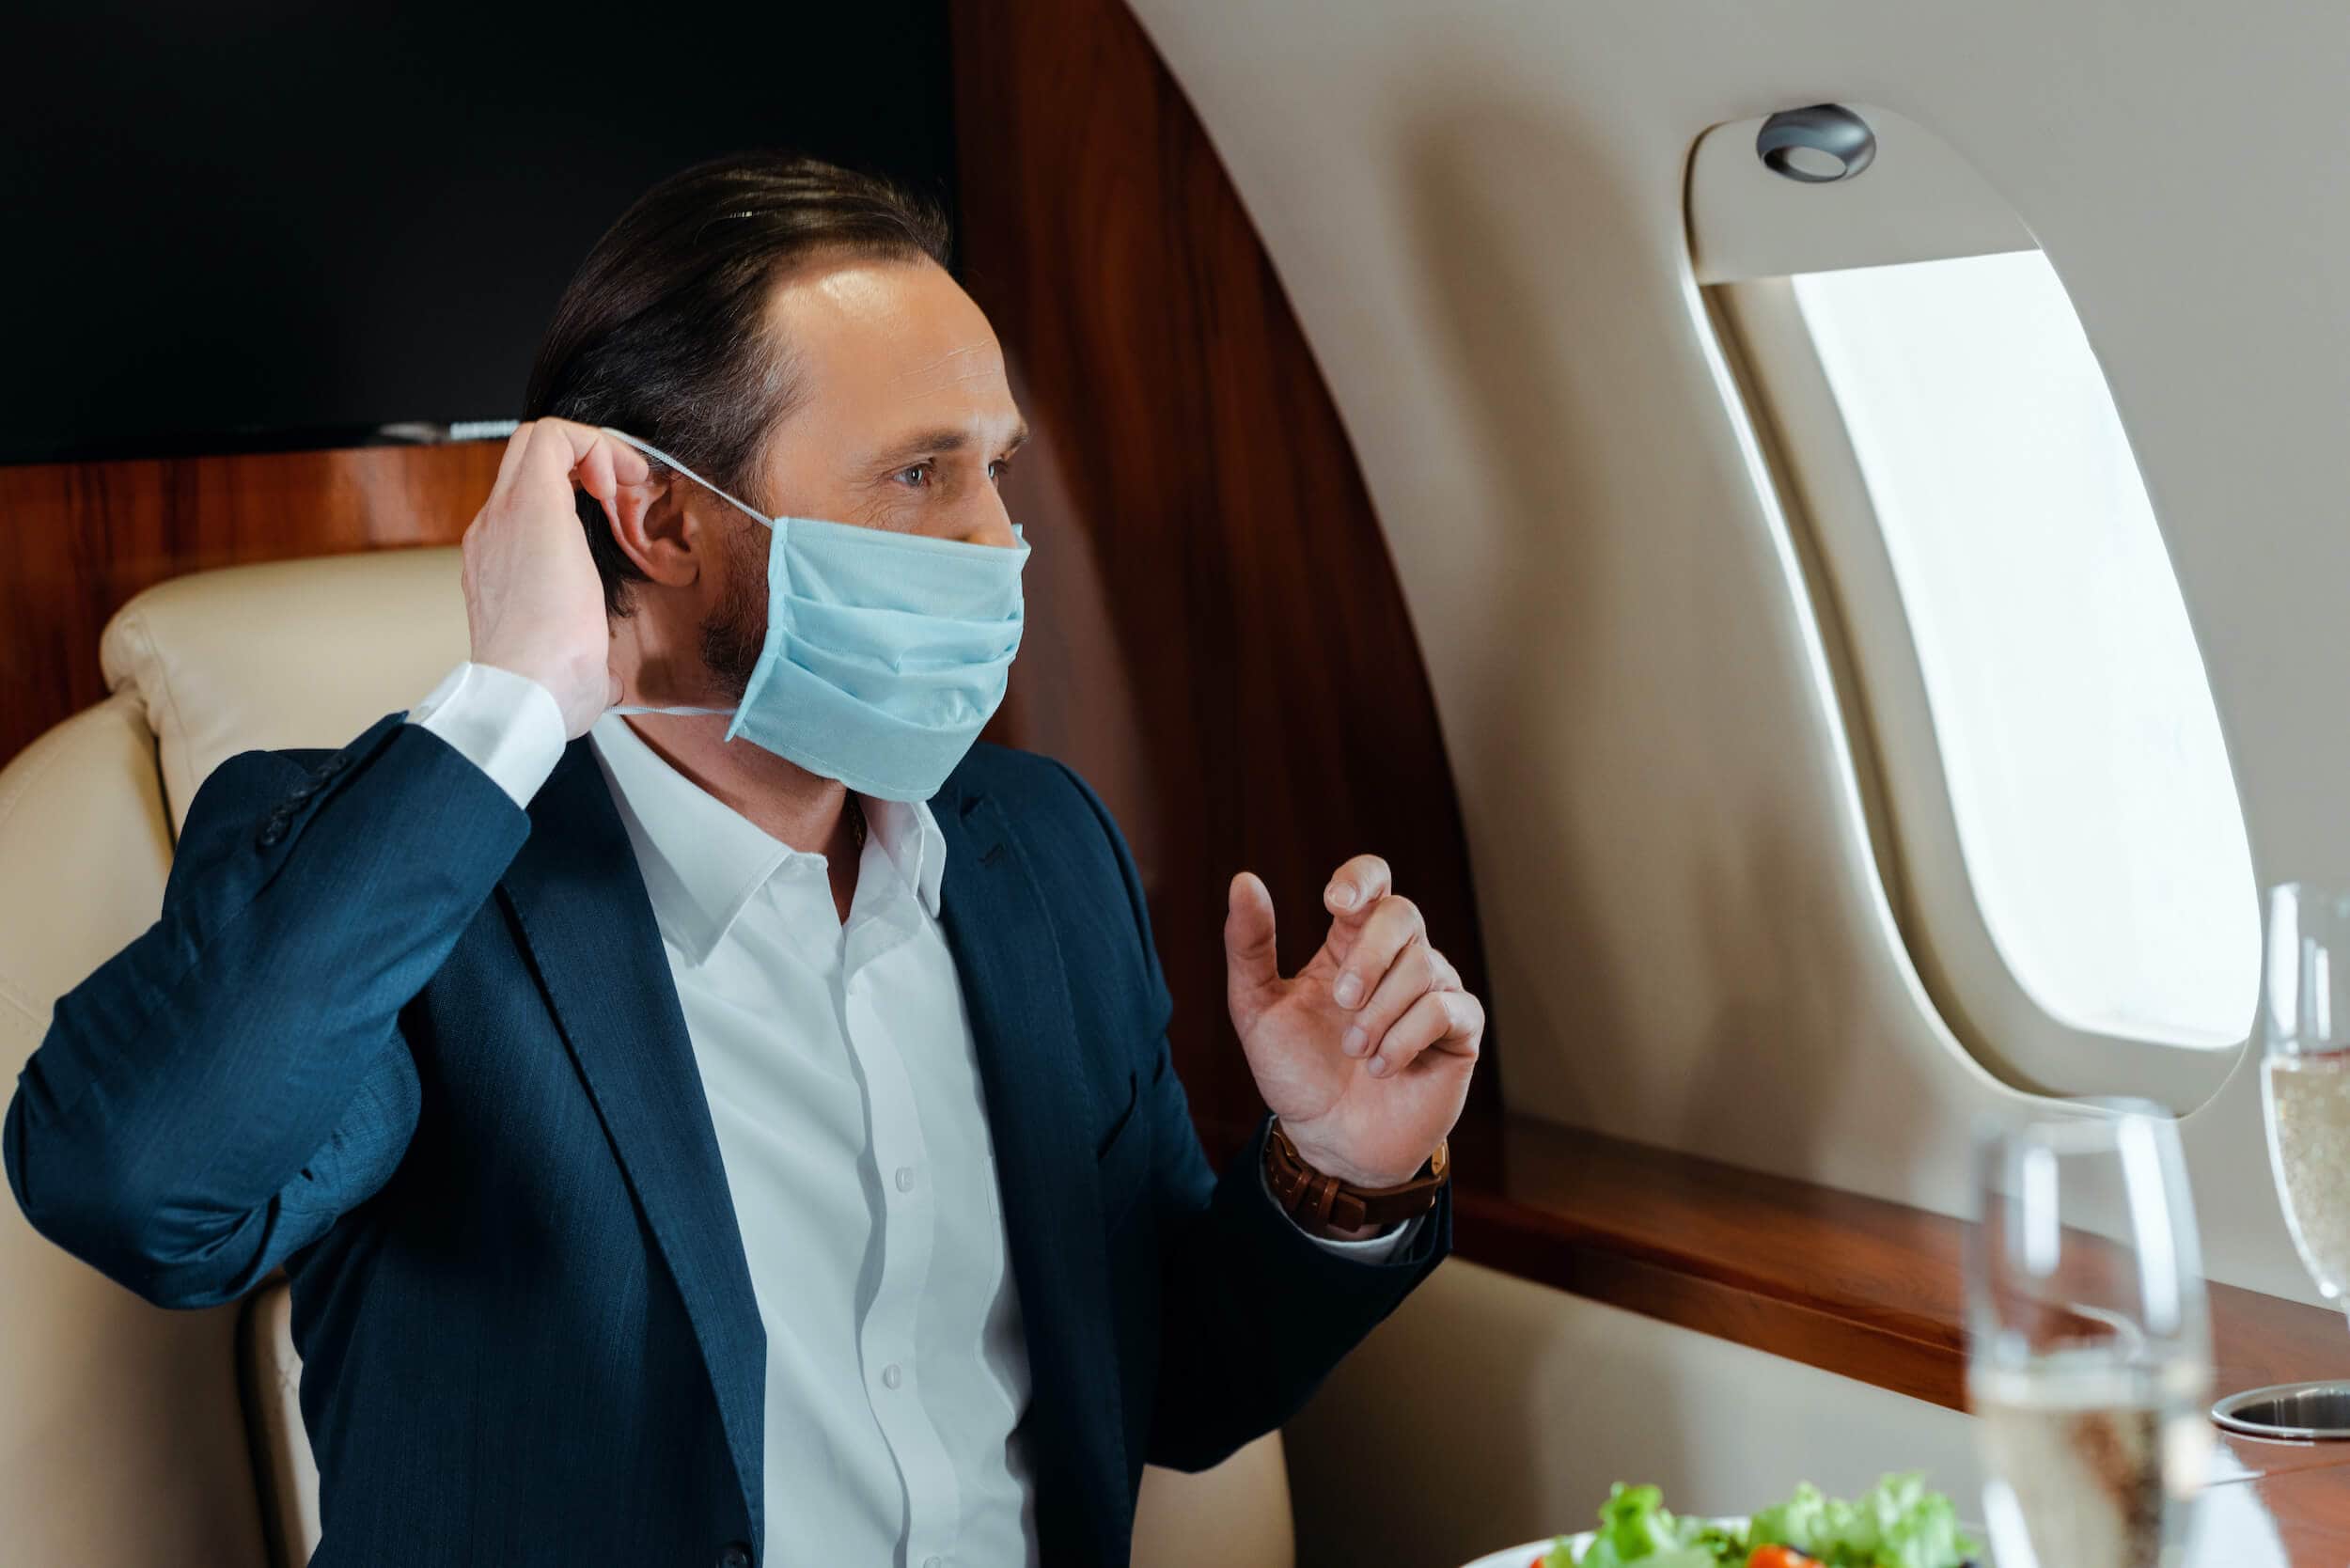 Private Jet Cabin Air Quality – How Clean Is the Cabin Air on a Private Jet?